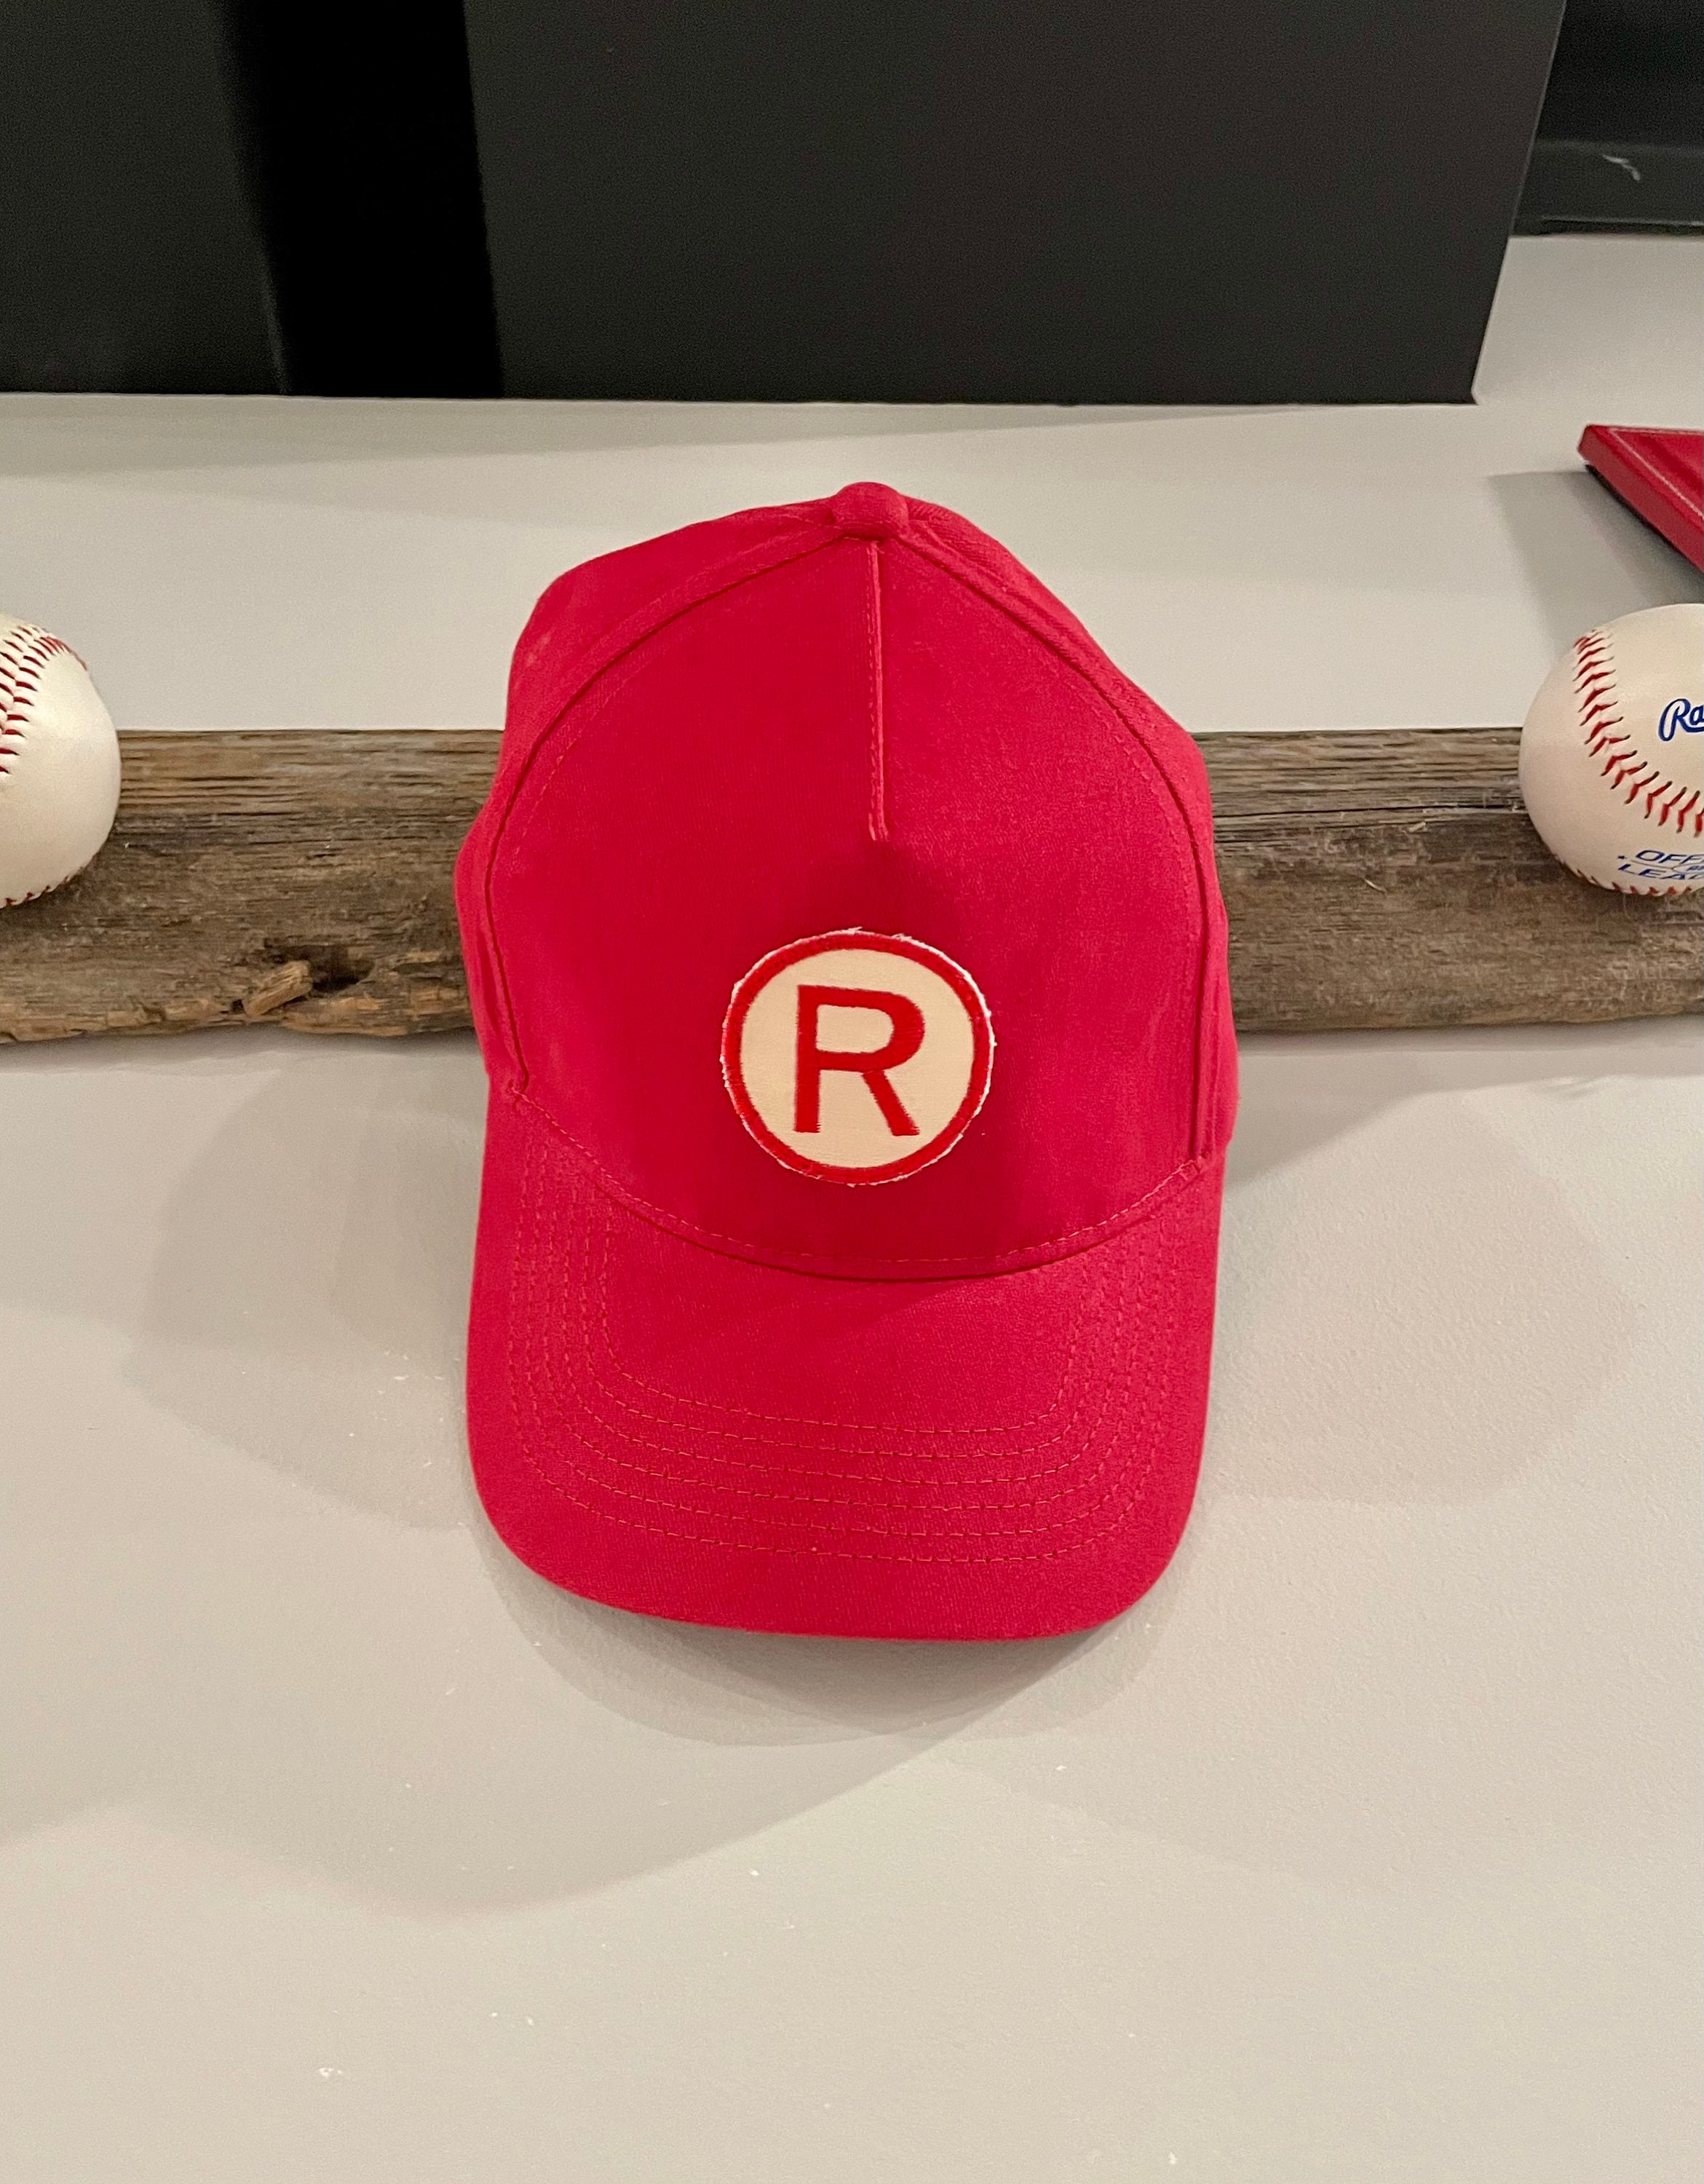 A League of Their Own Rockford Peaches Cosplay Baseball Hat Cap Red Color  Womens Costume Props Embroidery R Hip Hop Female Cap